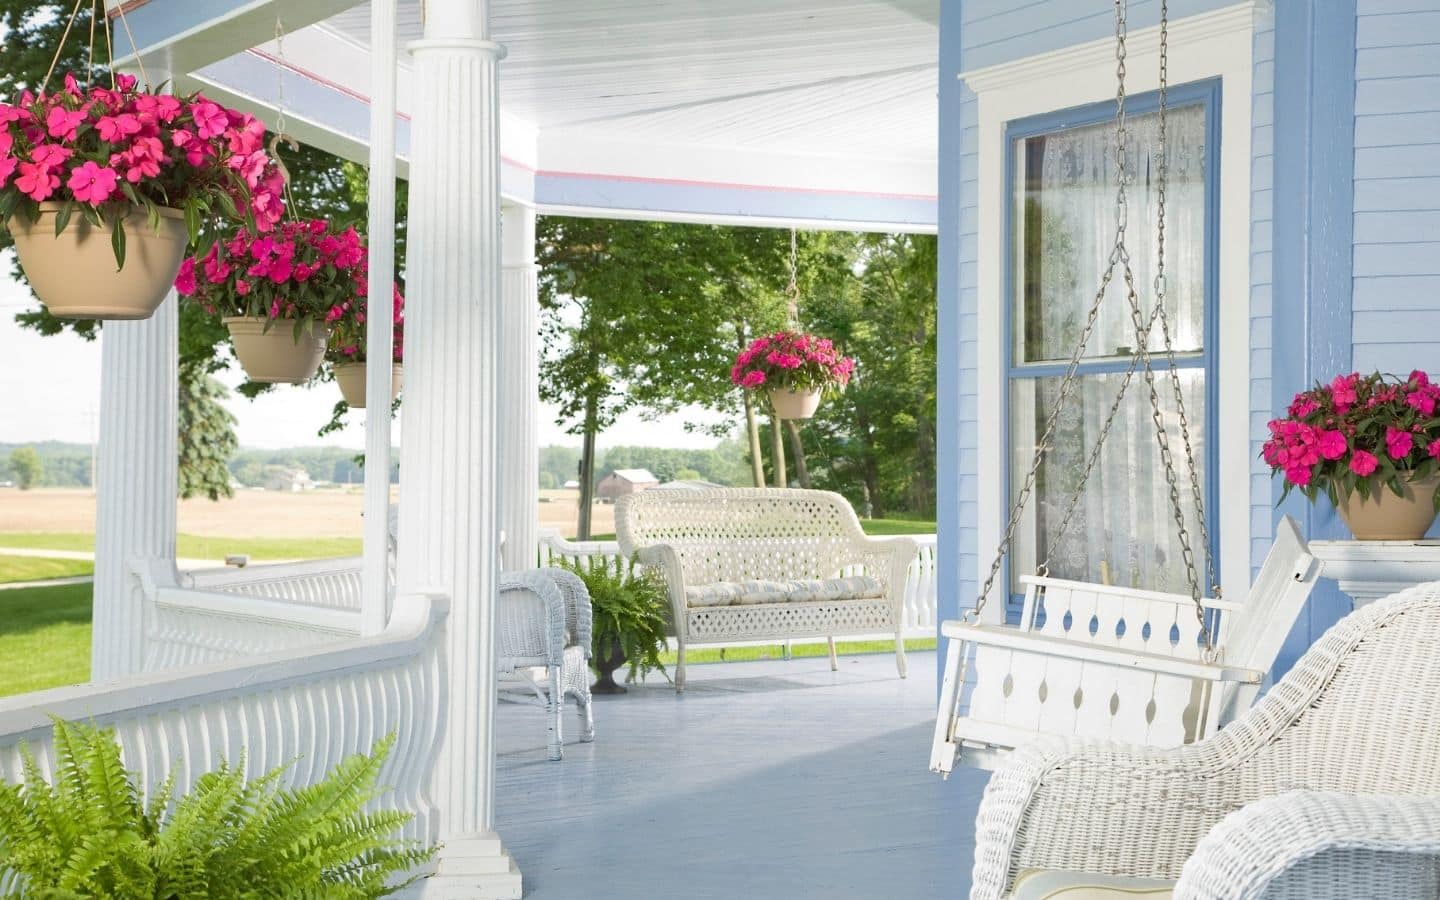 Front porch of the Inn with white trim, blue siding, wicker furniture and hanging baskets of red flowers